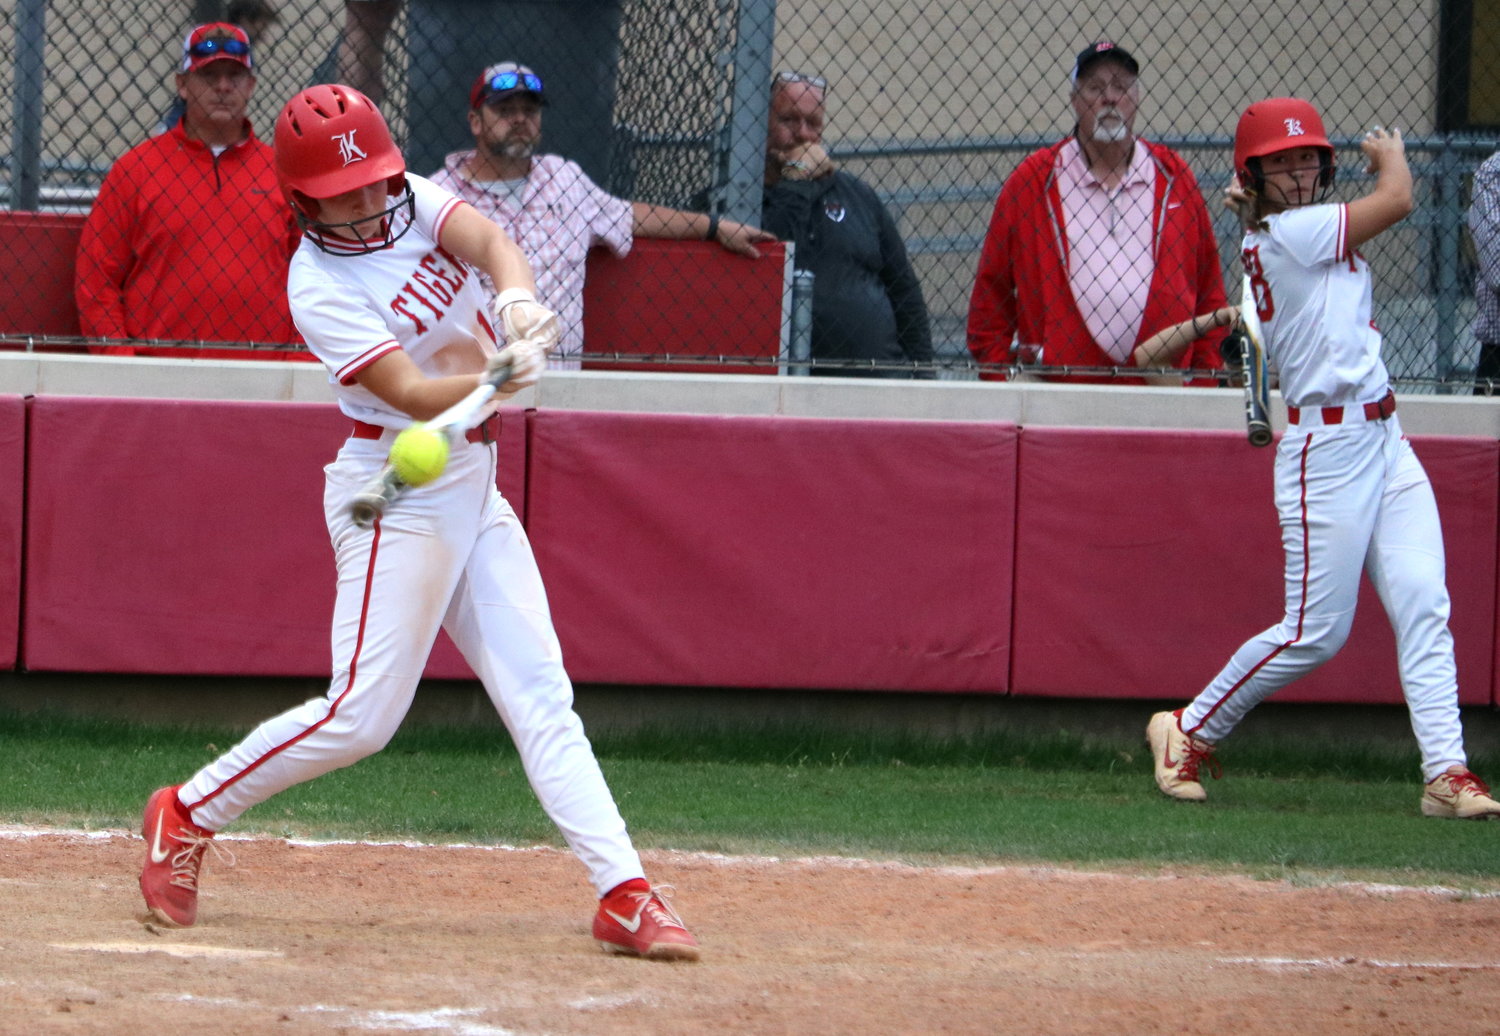 Hailey Gore hits during Tuesday’s game between Katy and Taylor at the Katy softball field.